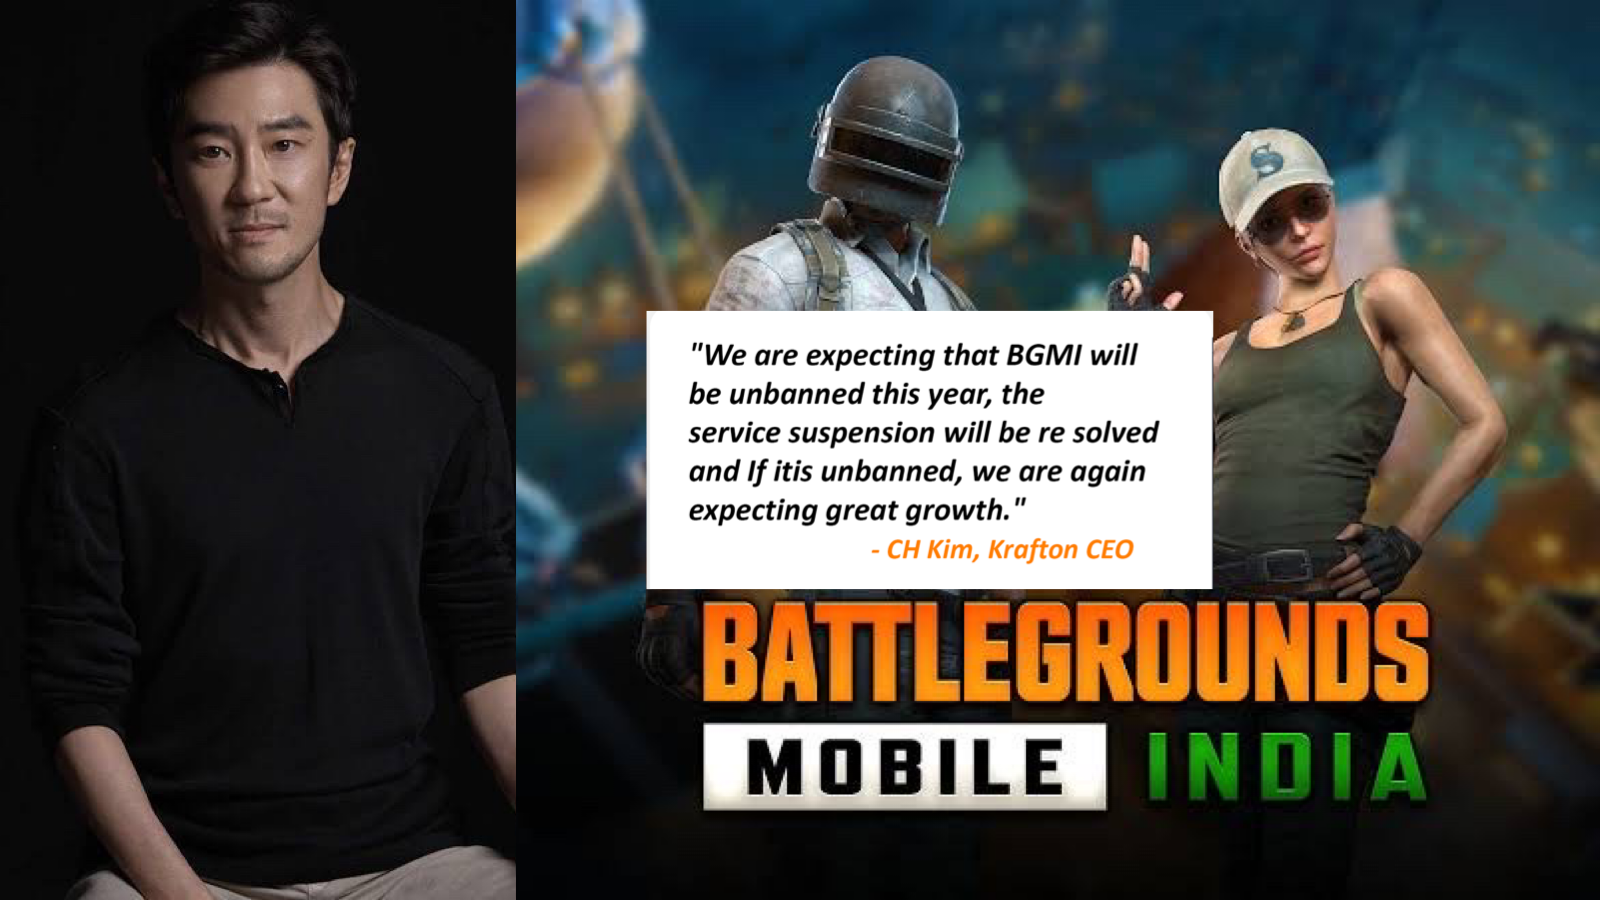 The Return of Battlegrounds Mobile India: The Wait is Almost Over